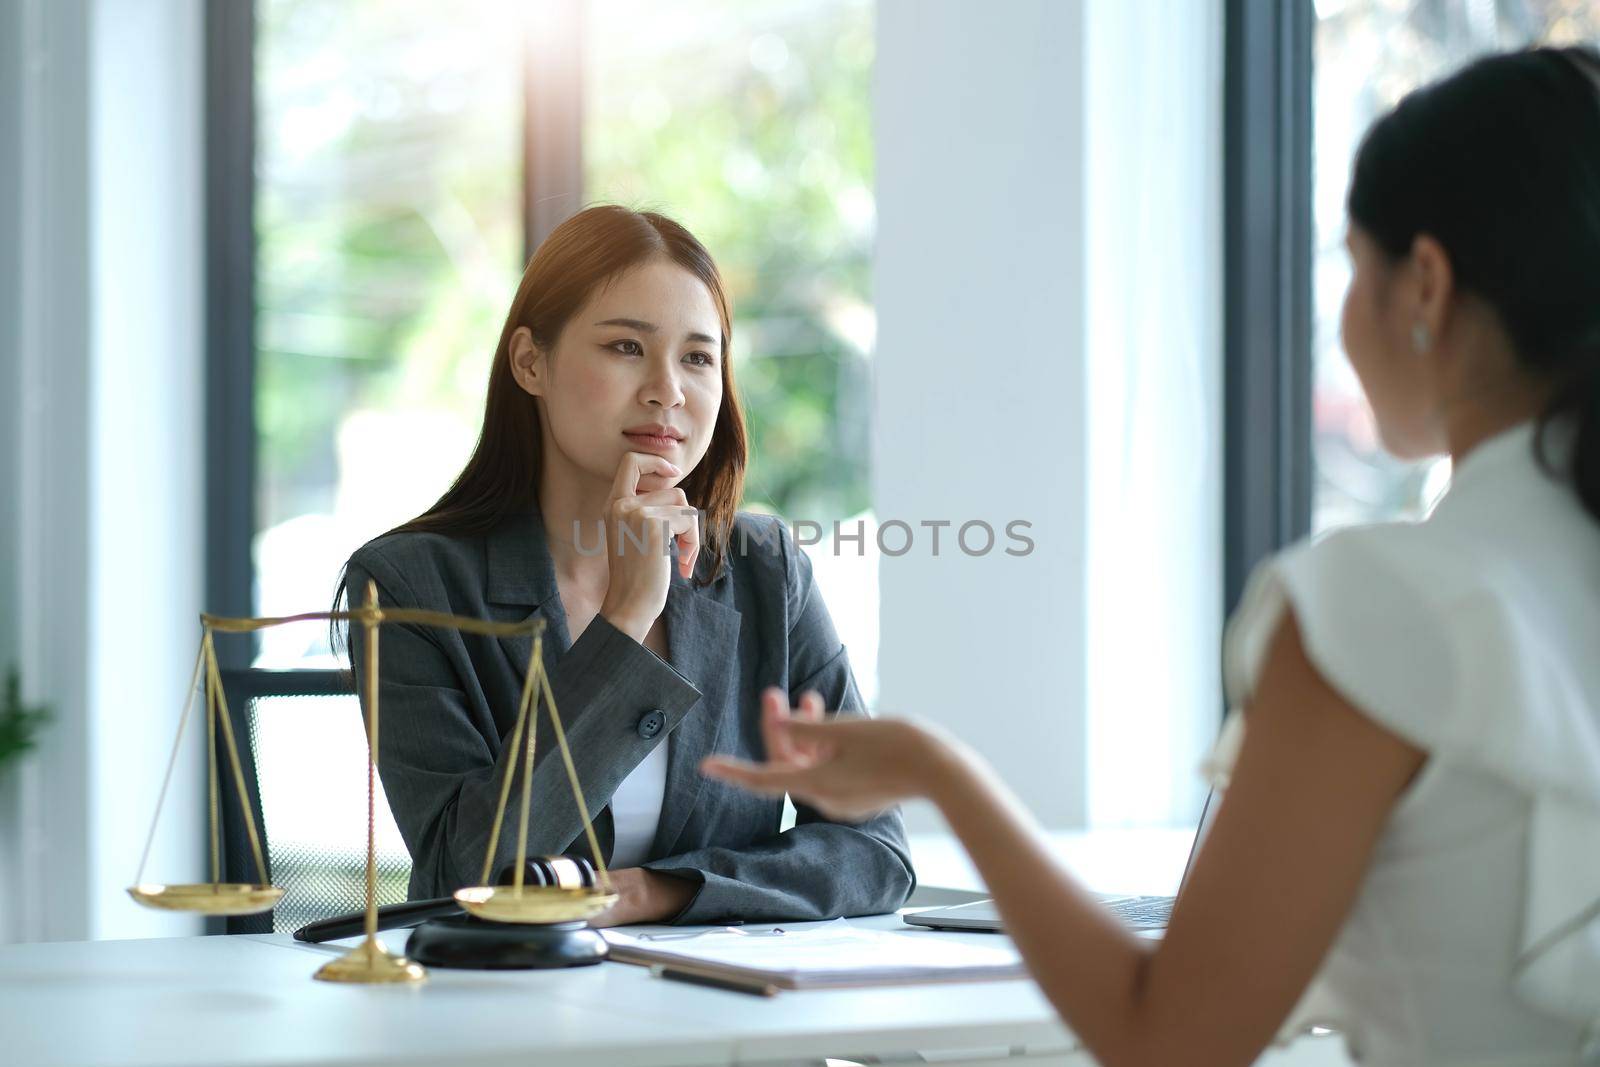 Business woman and lawyers discussing contract papers with brass scale on wooden desk in office. Law, legal services, advice, Justice concept.